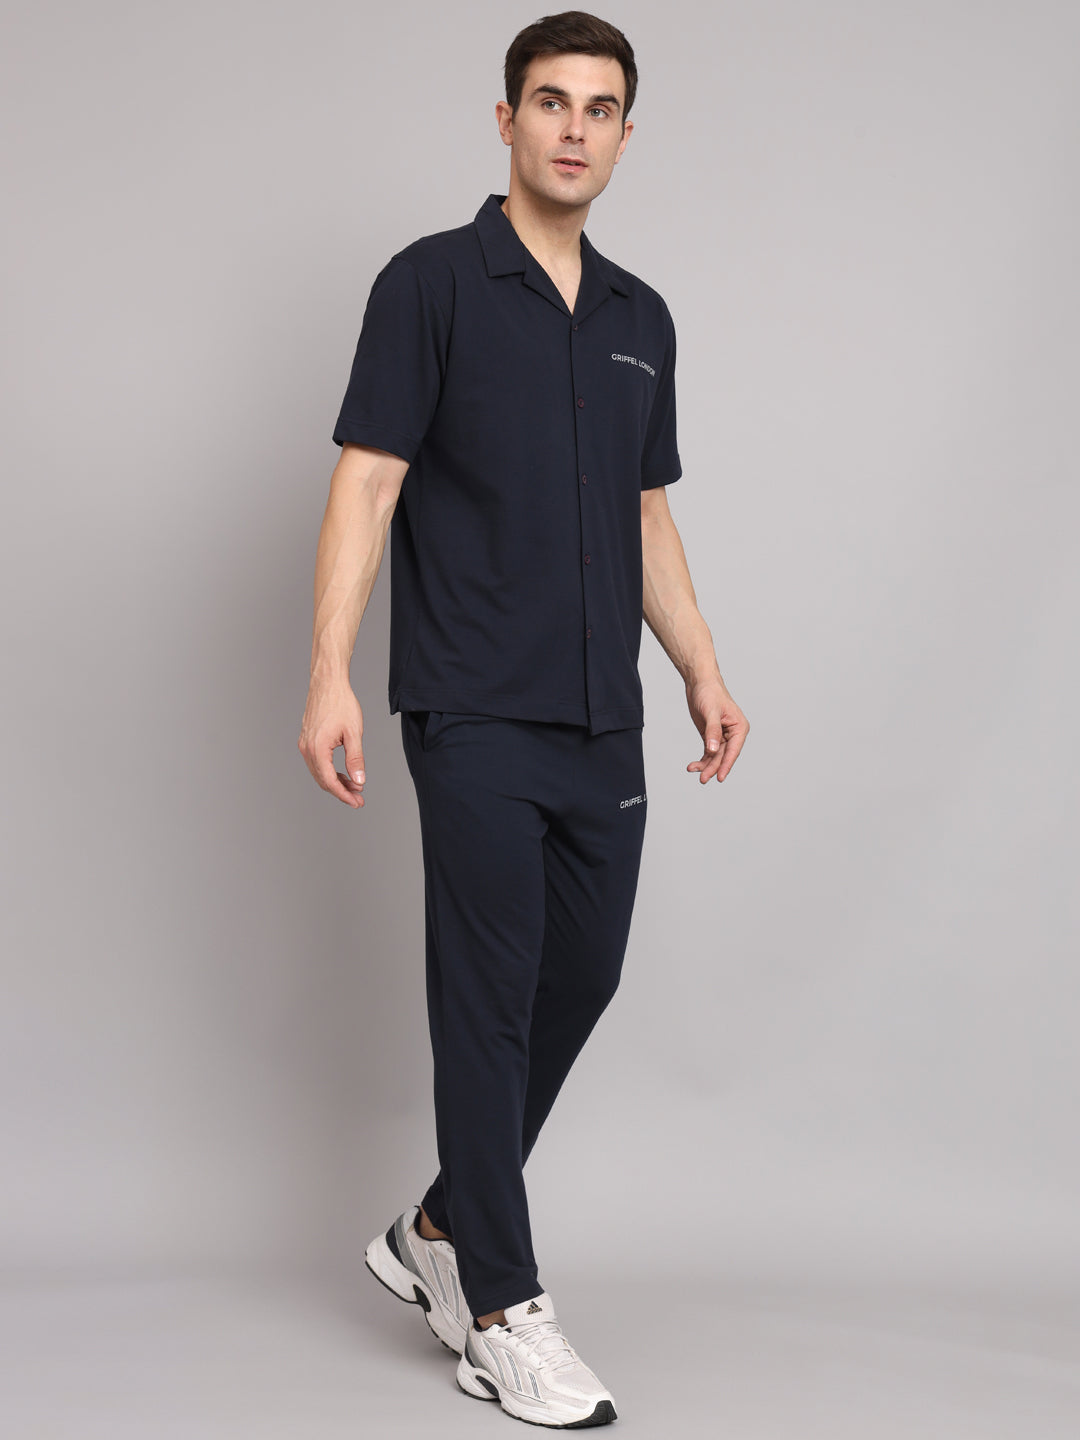 Griffel Men's Pre Winter Front Logo Solid Cotton Basic Navy Bowling Shirt and Joggers Full Co-Ord Set - griffel